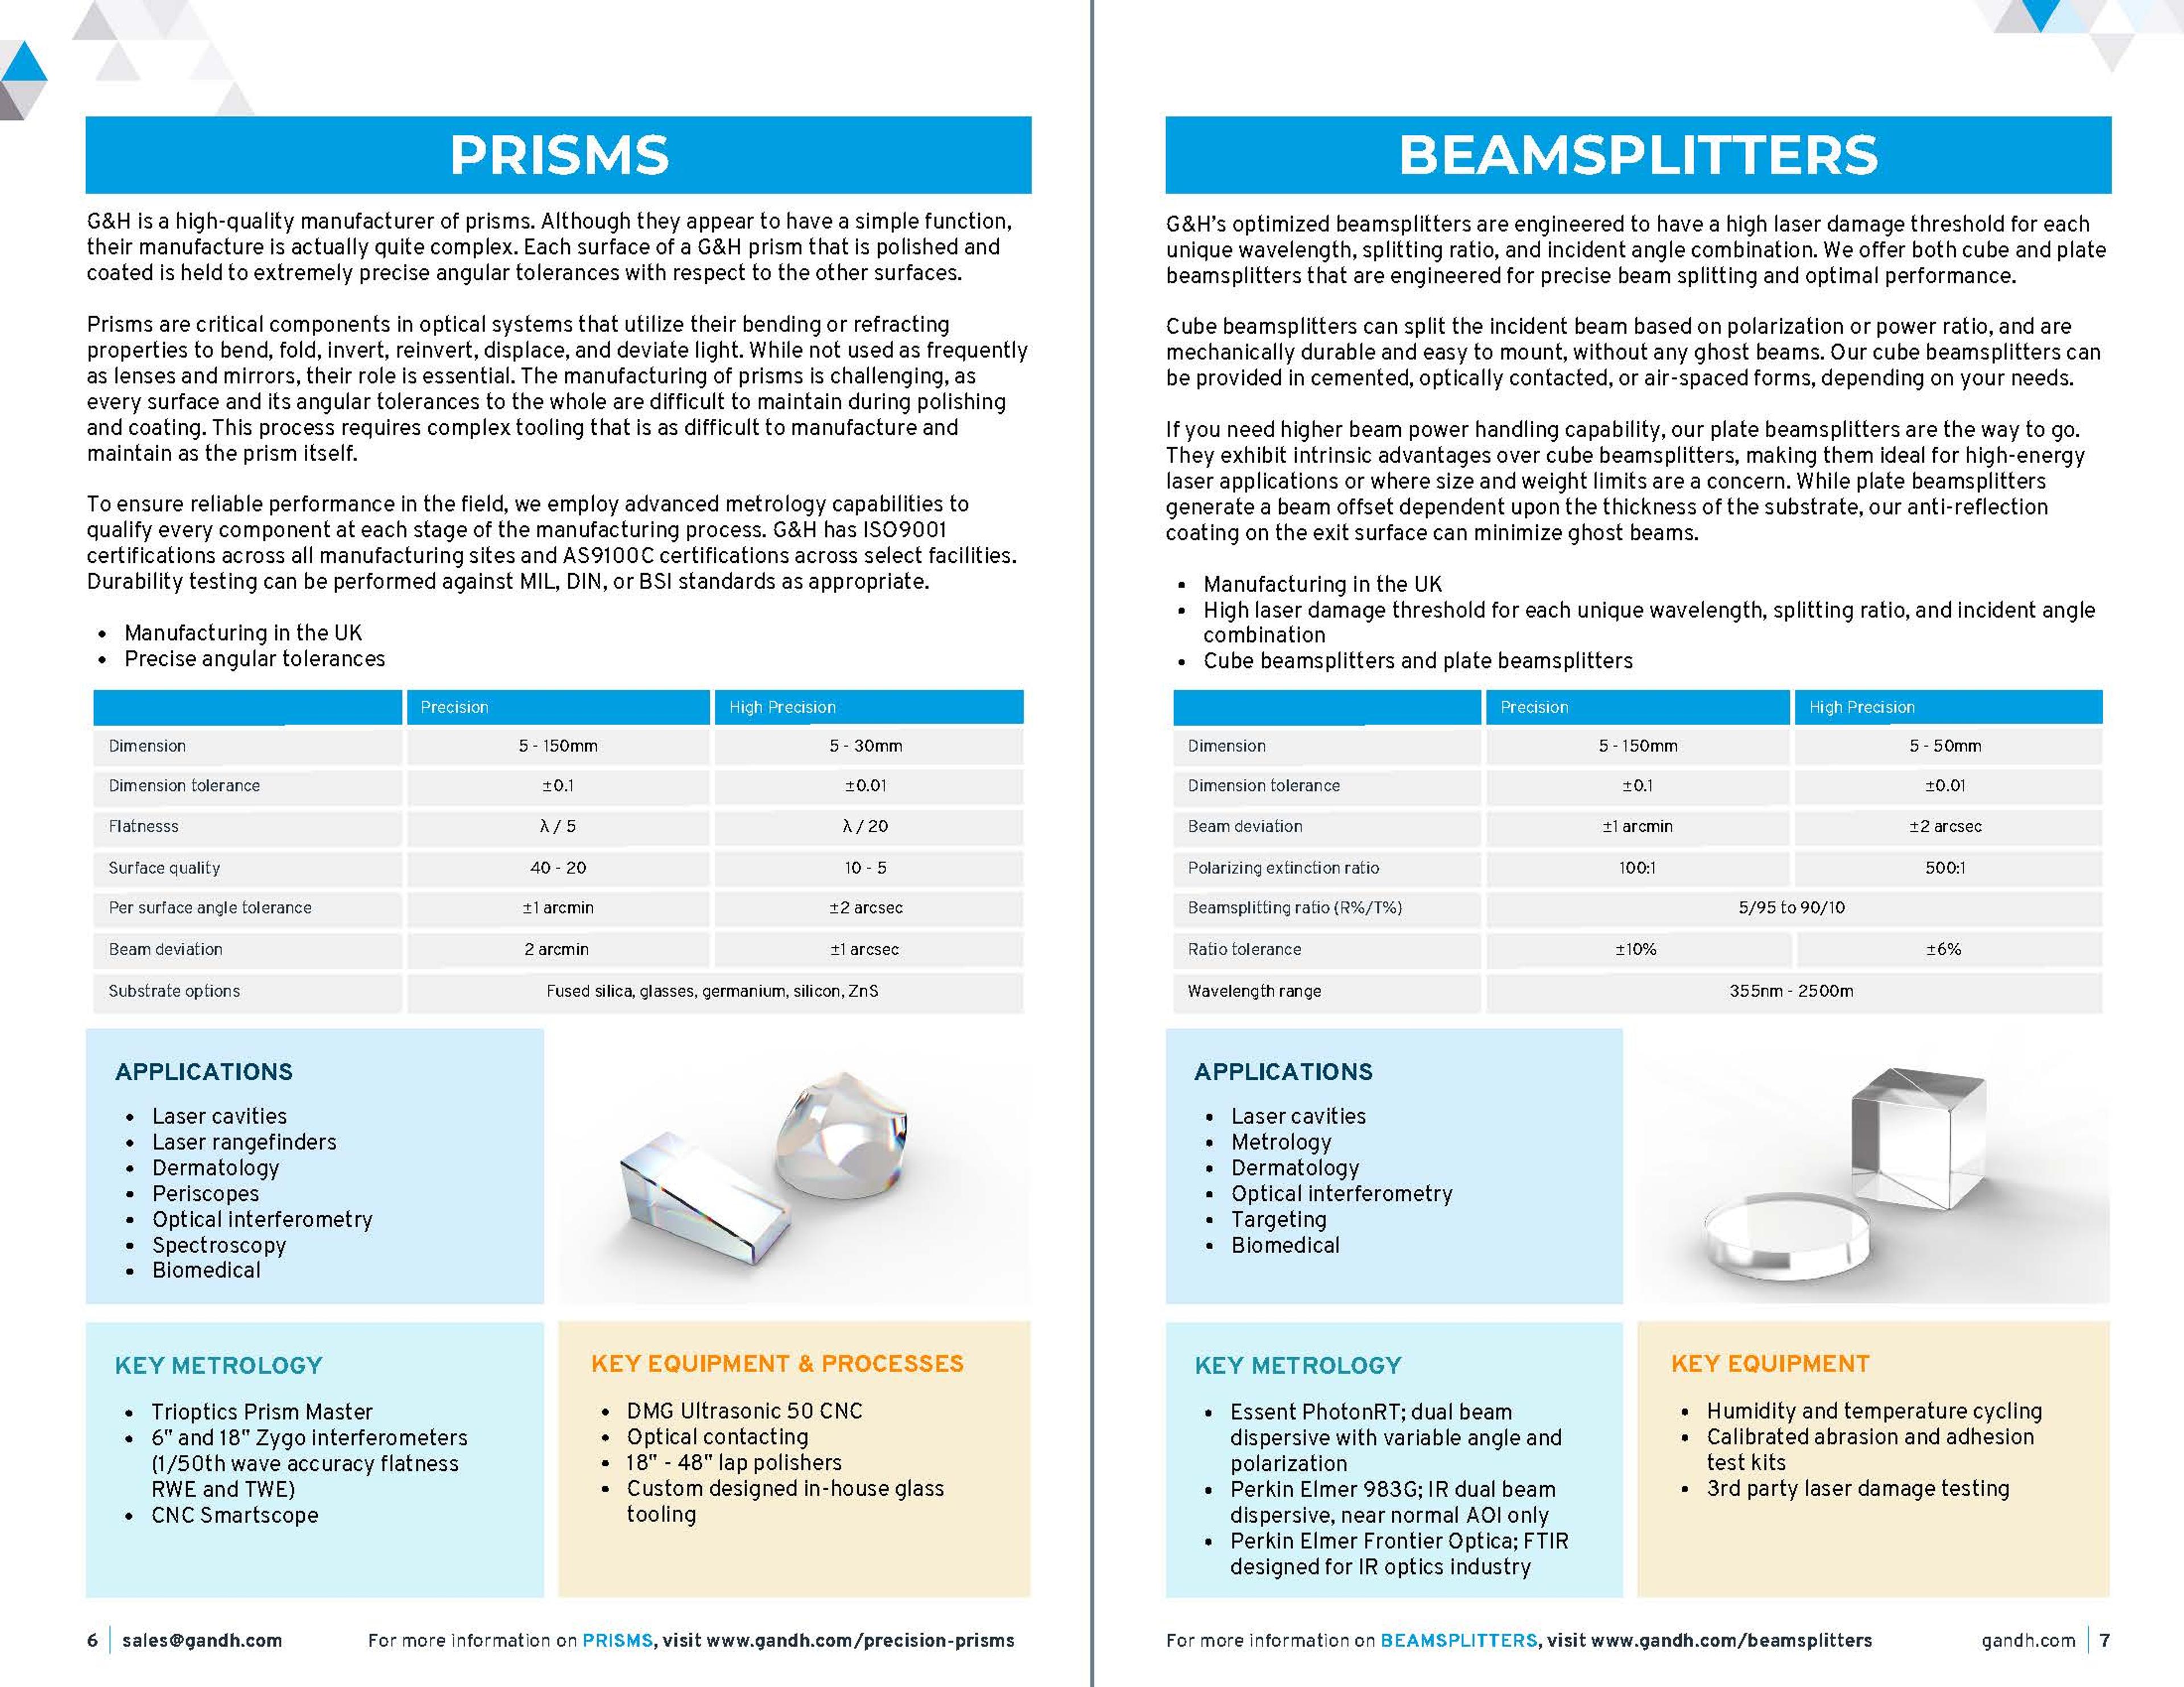 G&H Product & Solutions Guide - Precision Optics Page 06-07